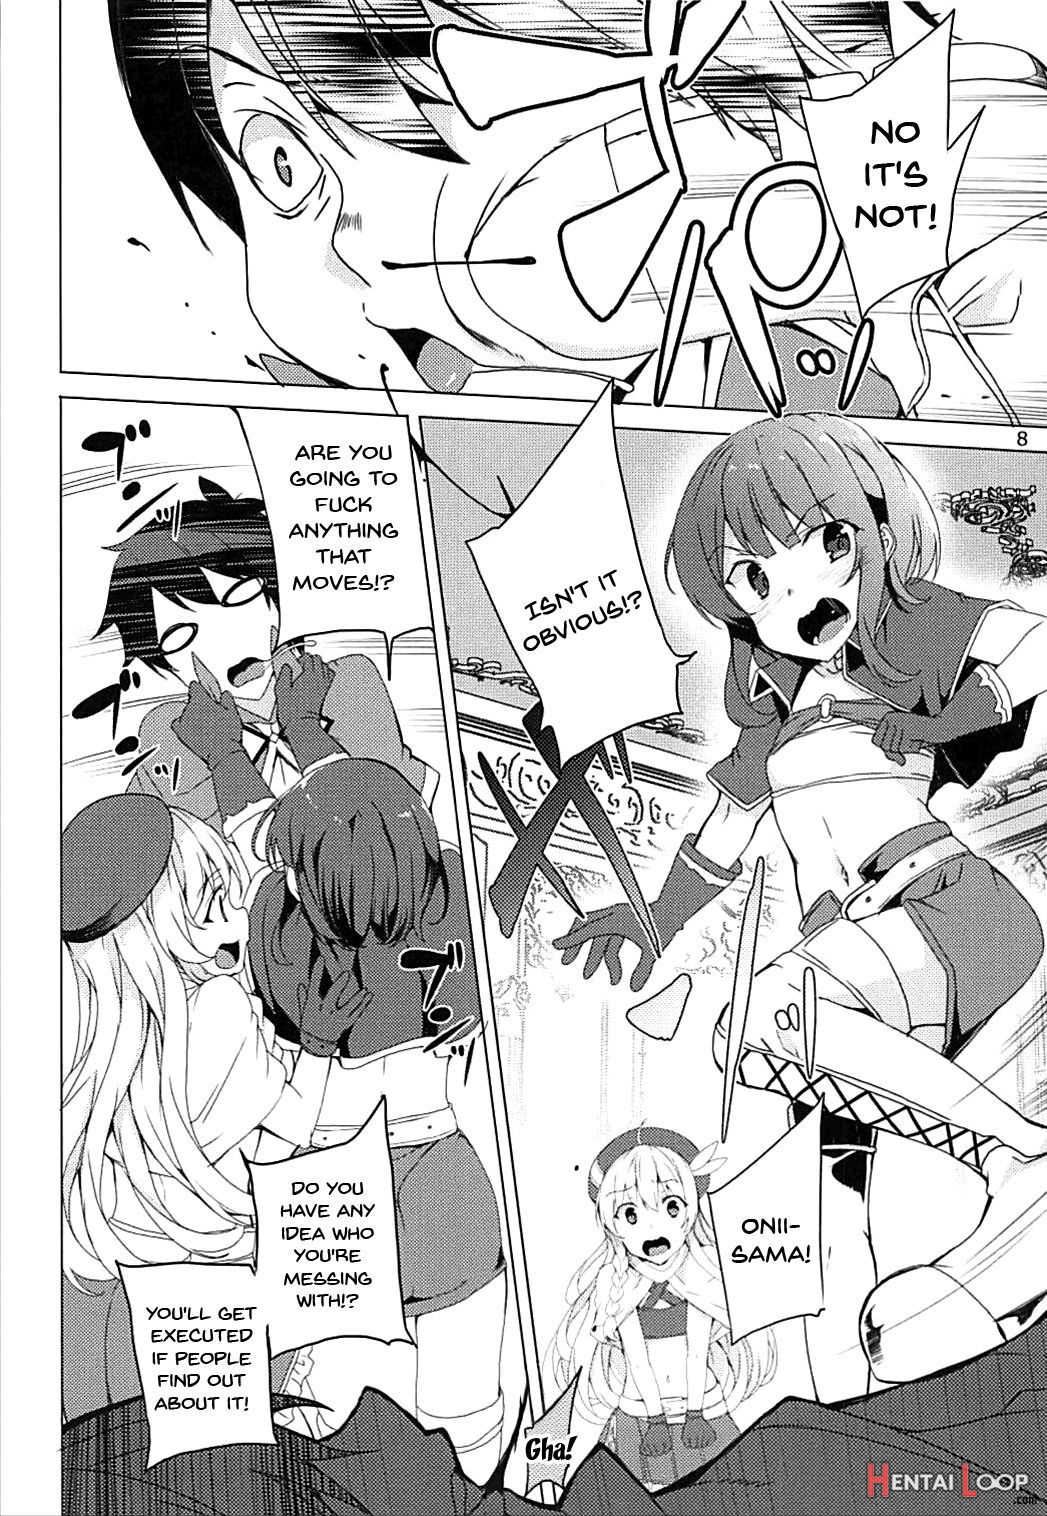 Over There! Megumin's Thief Group page 7